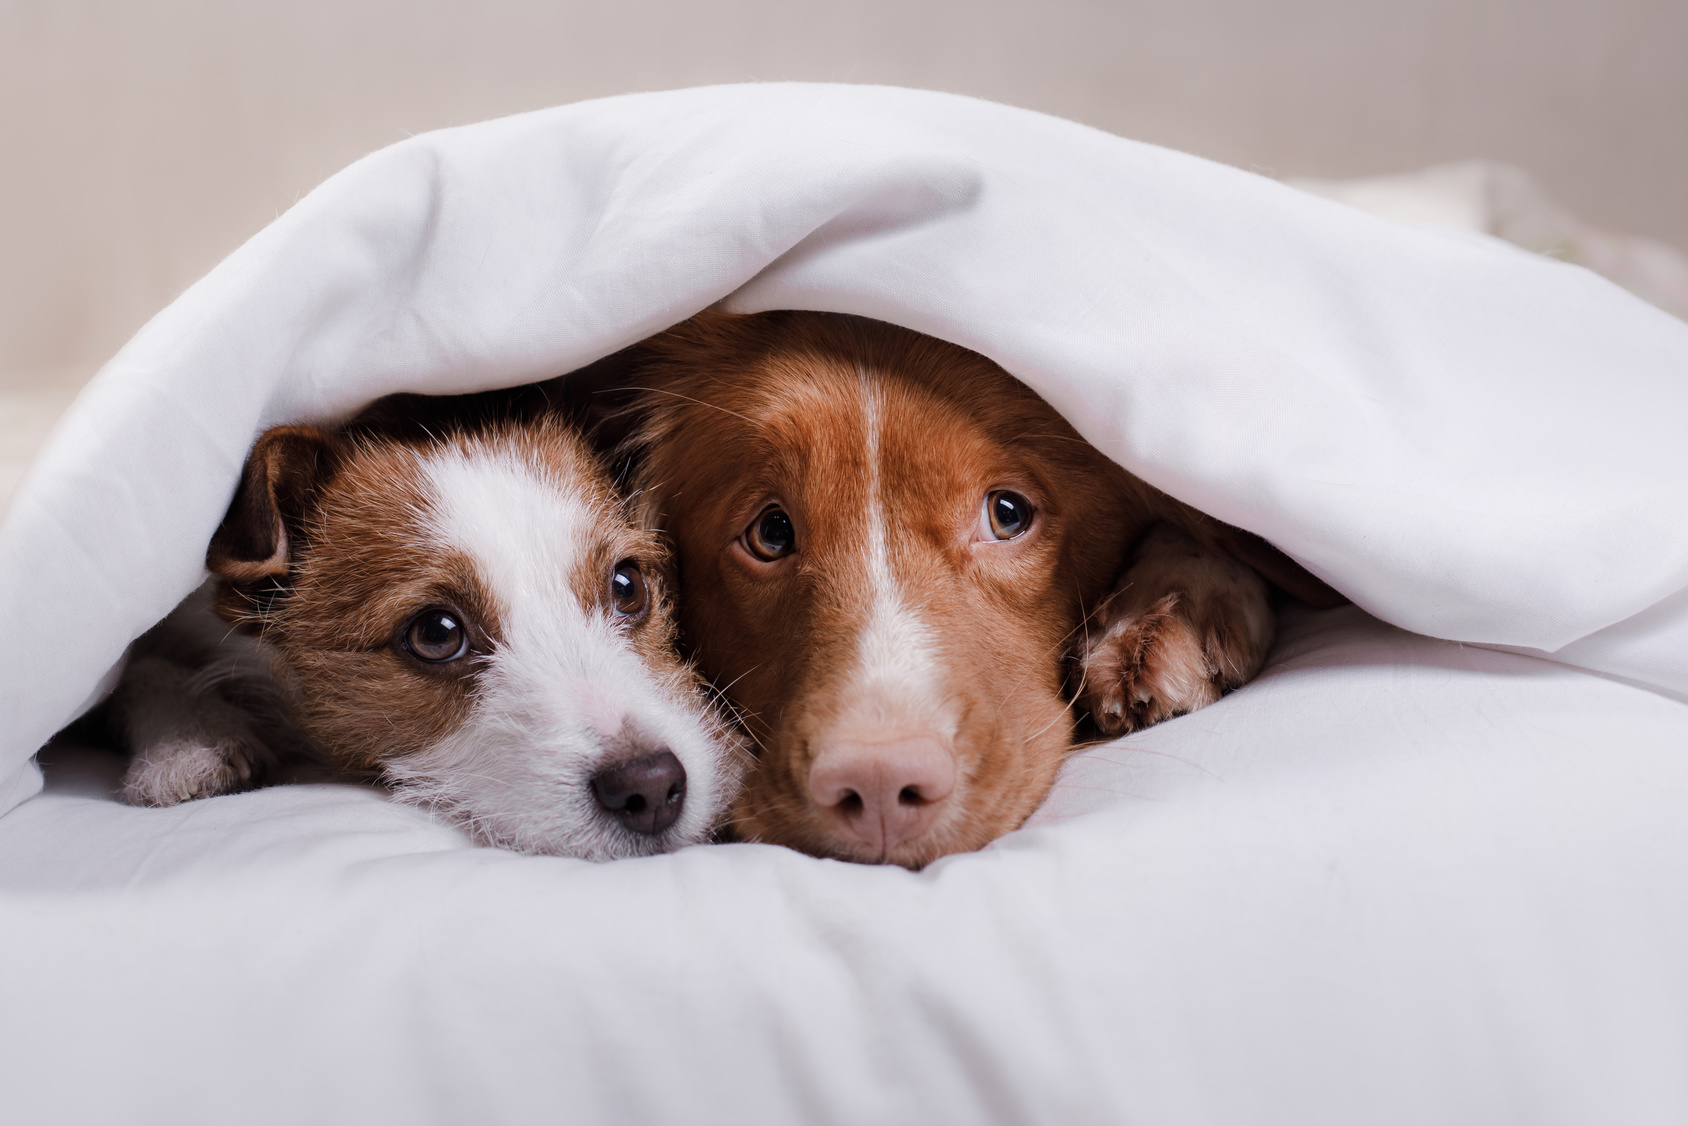 Dog Jack Russell Terrier and Nova Scotia duck tolling Retriever lying on the bed under the covers